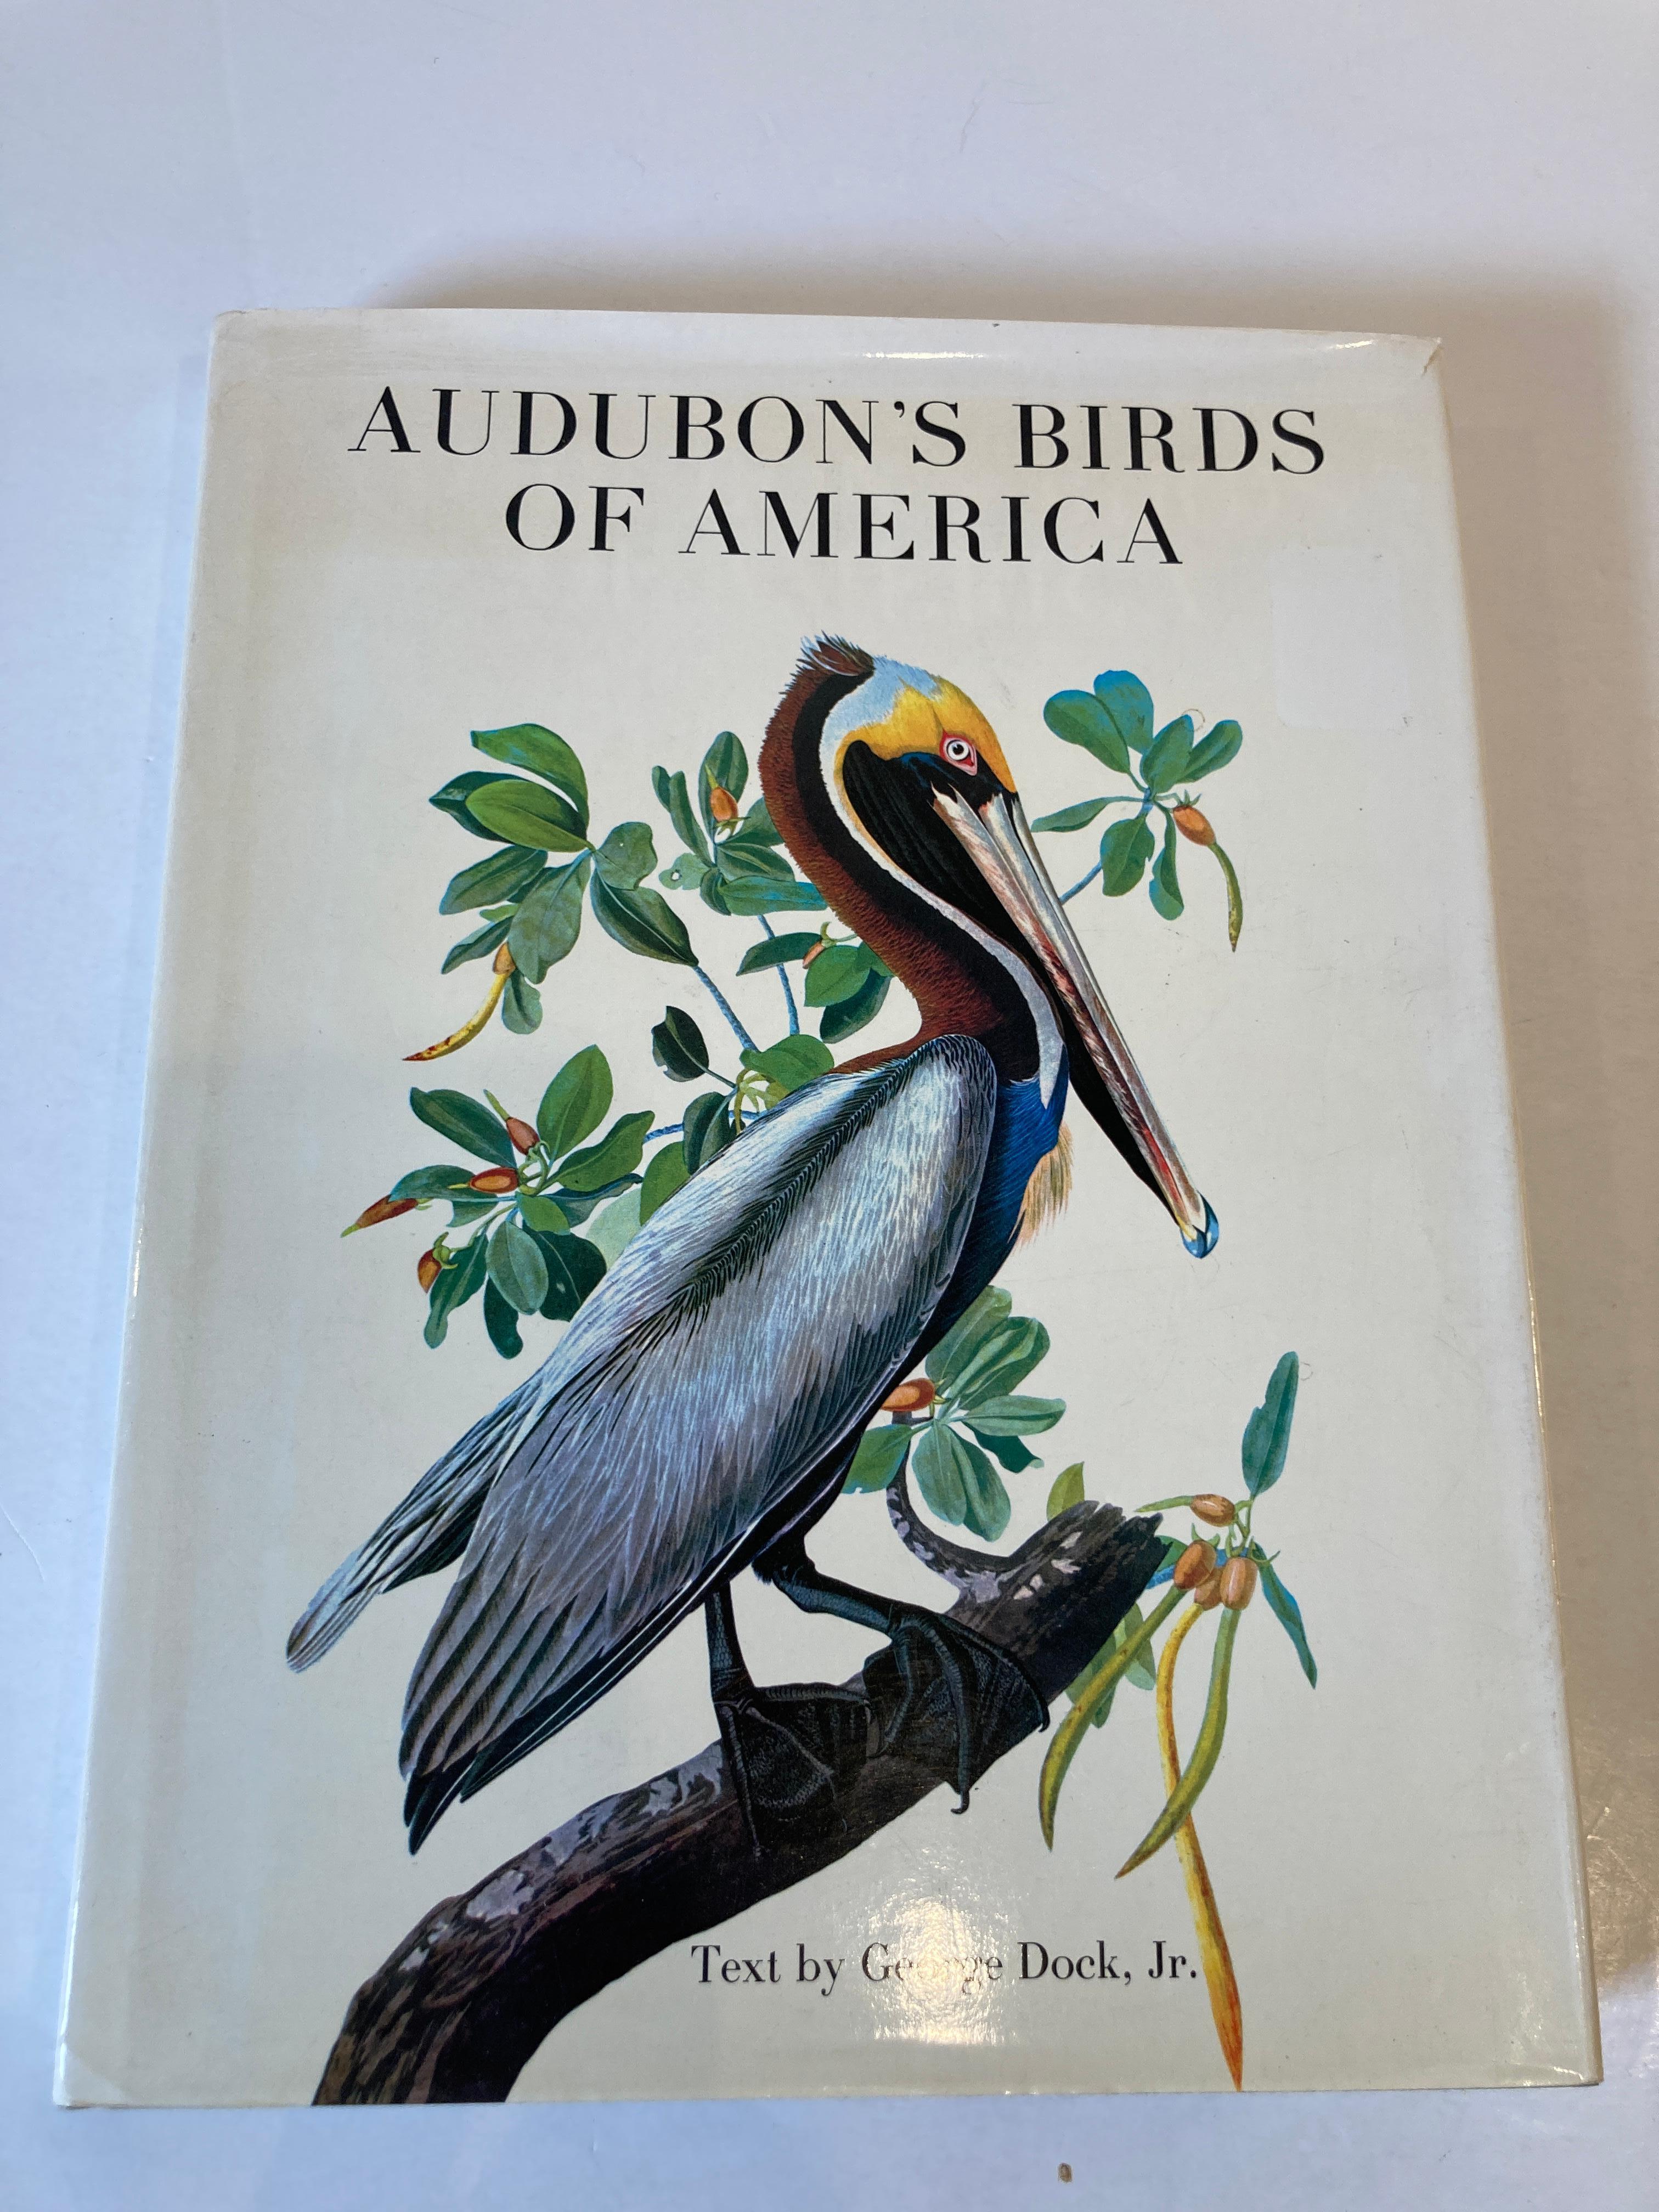 Audubon's Birds Of America by George Dock Jr. Hardcover 
Edition of 1978.
The Birds of America is a book by naturalist and painter John James Audubon, containing illustrations of a wide variety of birds of the United States. It was first published